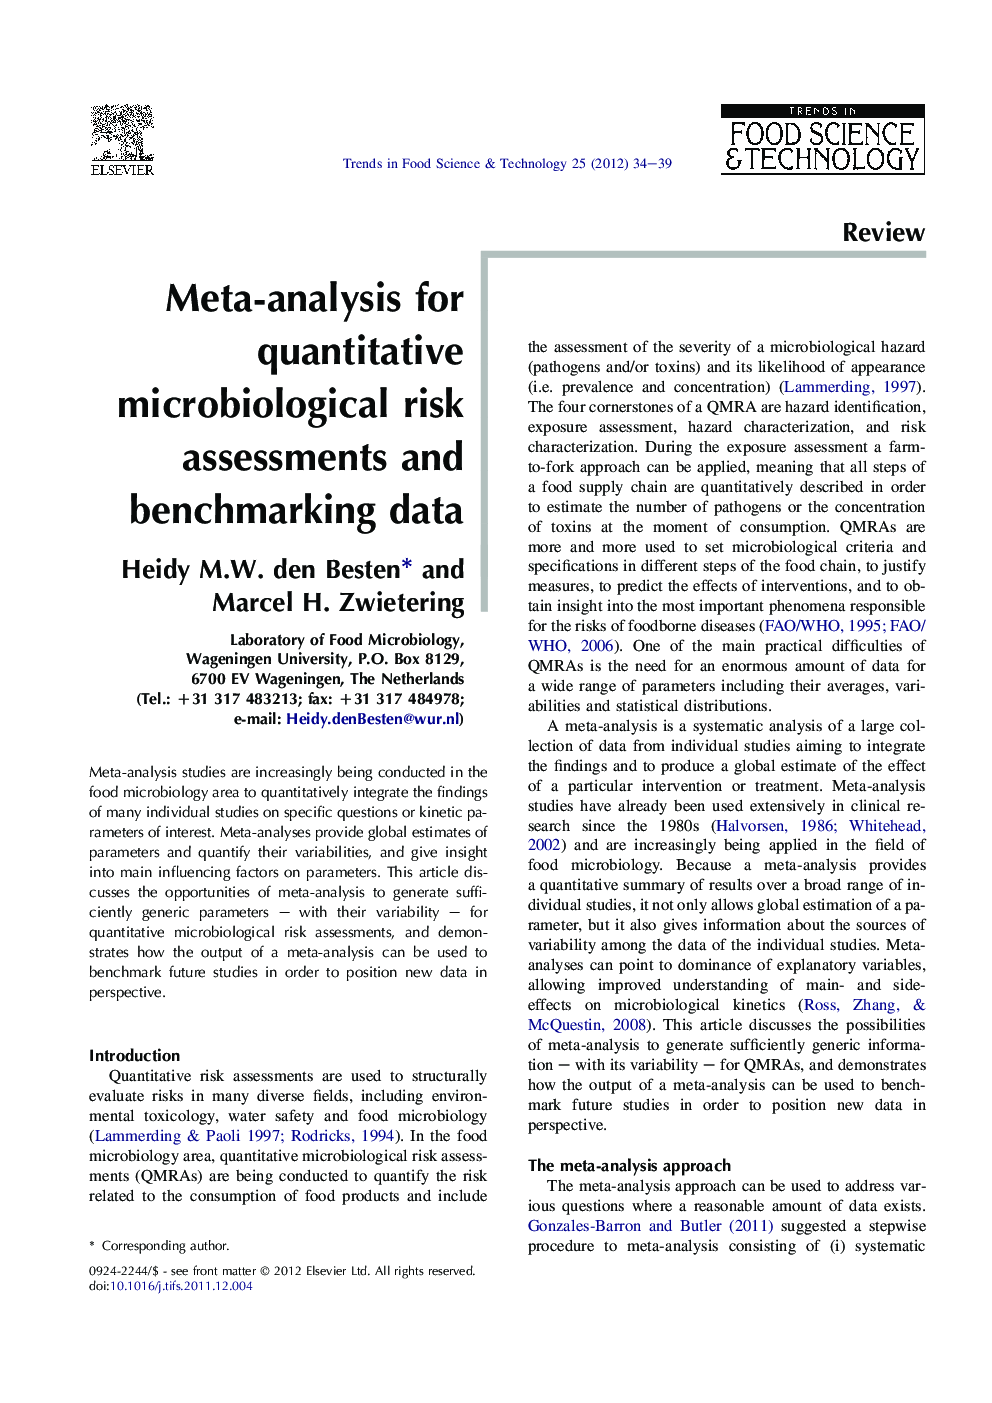 Meta-analysis for quantitative microbiological risk assessments and benchmarking data